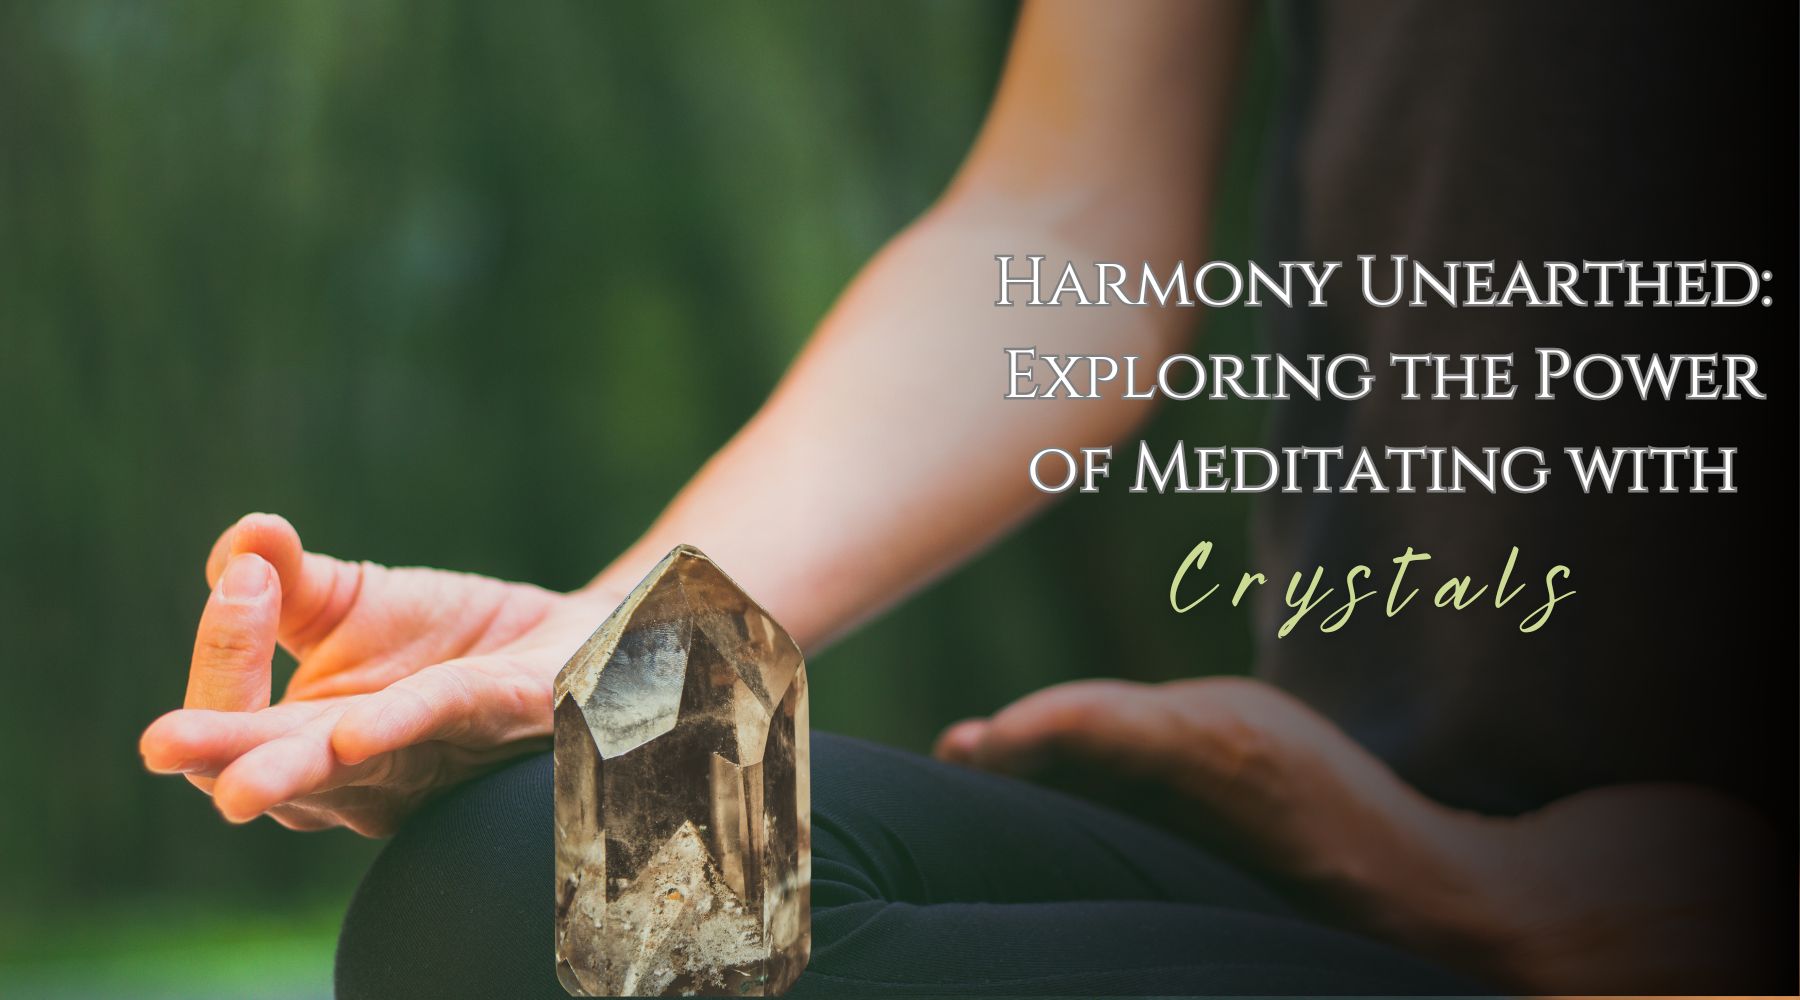 Harmony Unearthed: Exploring the Power of Meditating with Crystals